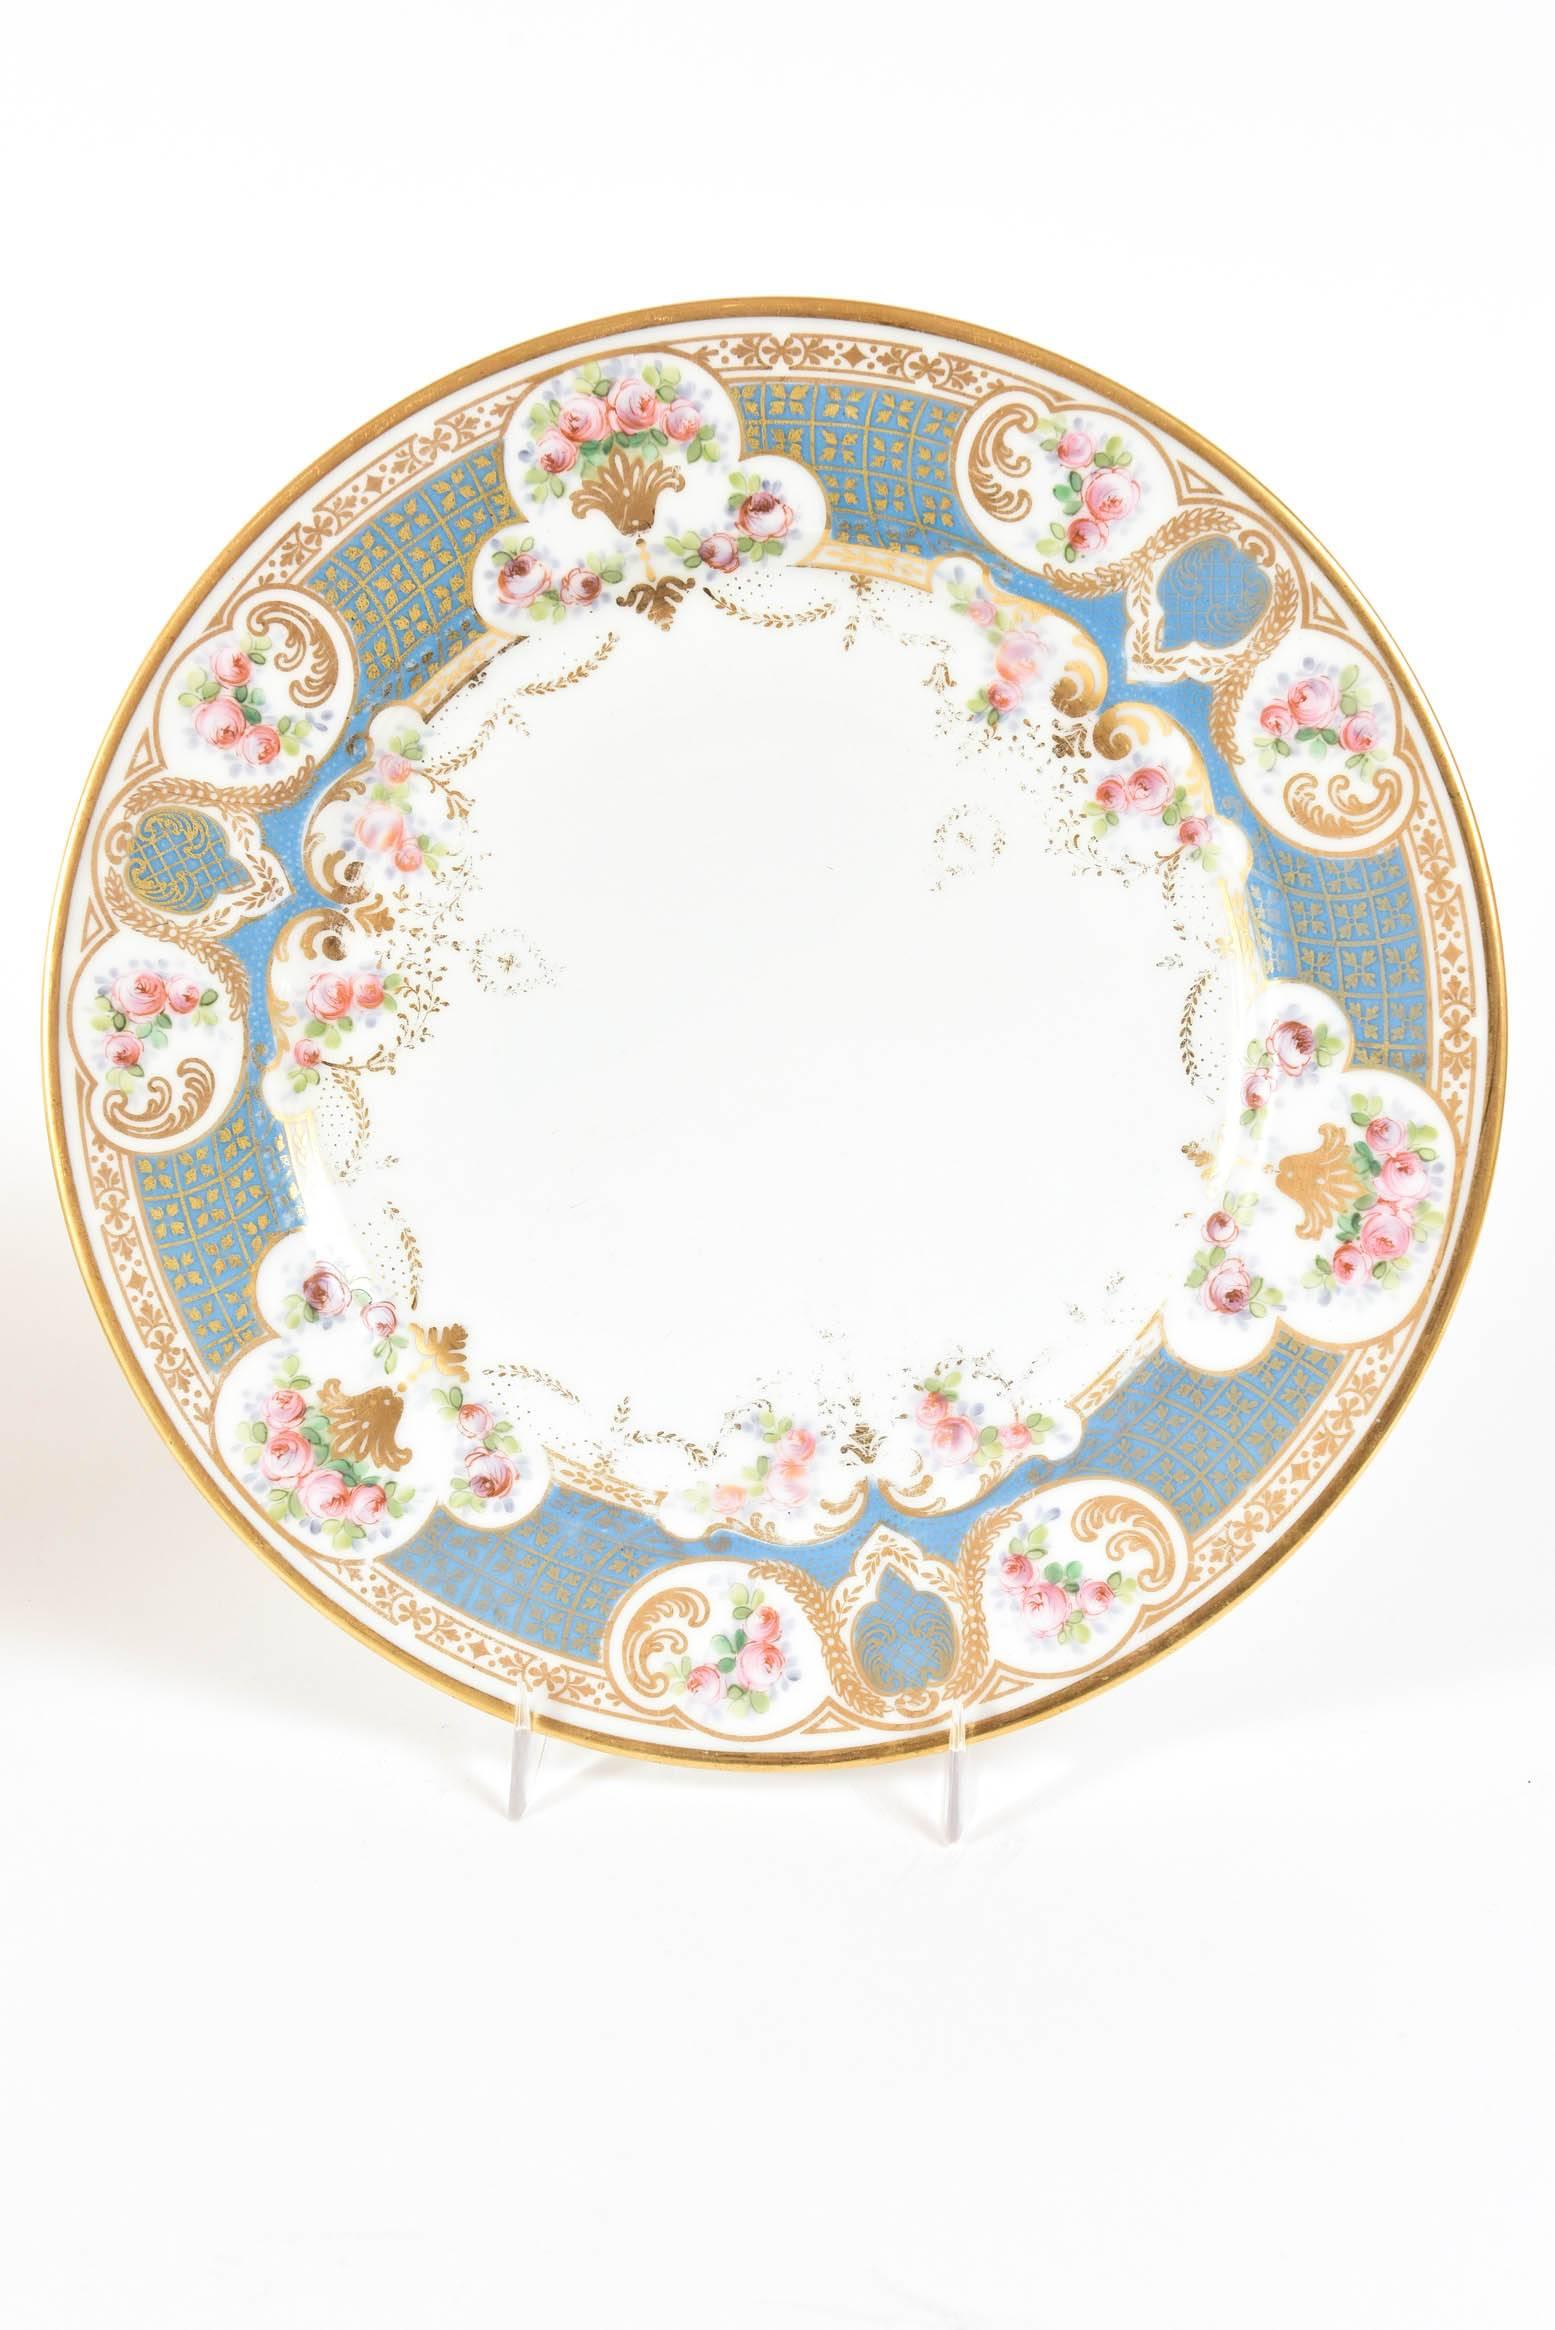 French Pretty Turquoise and Rose Pink Dinner Plates, Antique, circa 1900